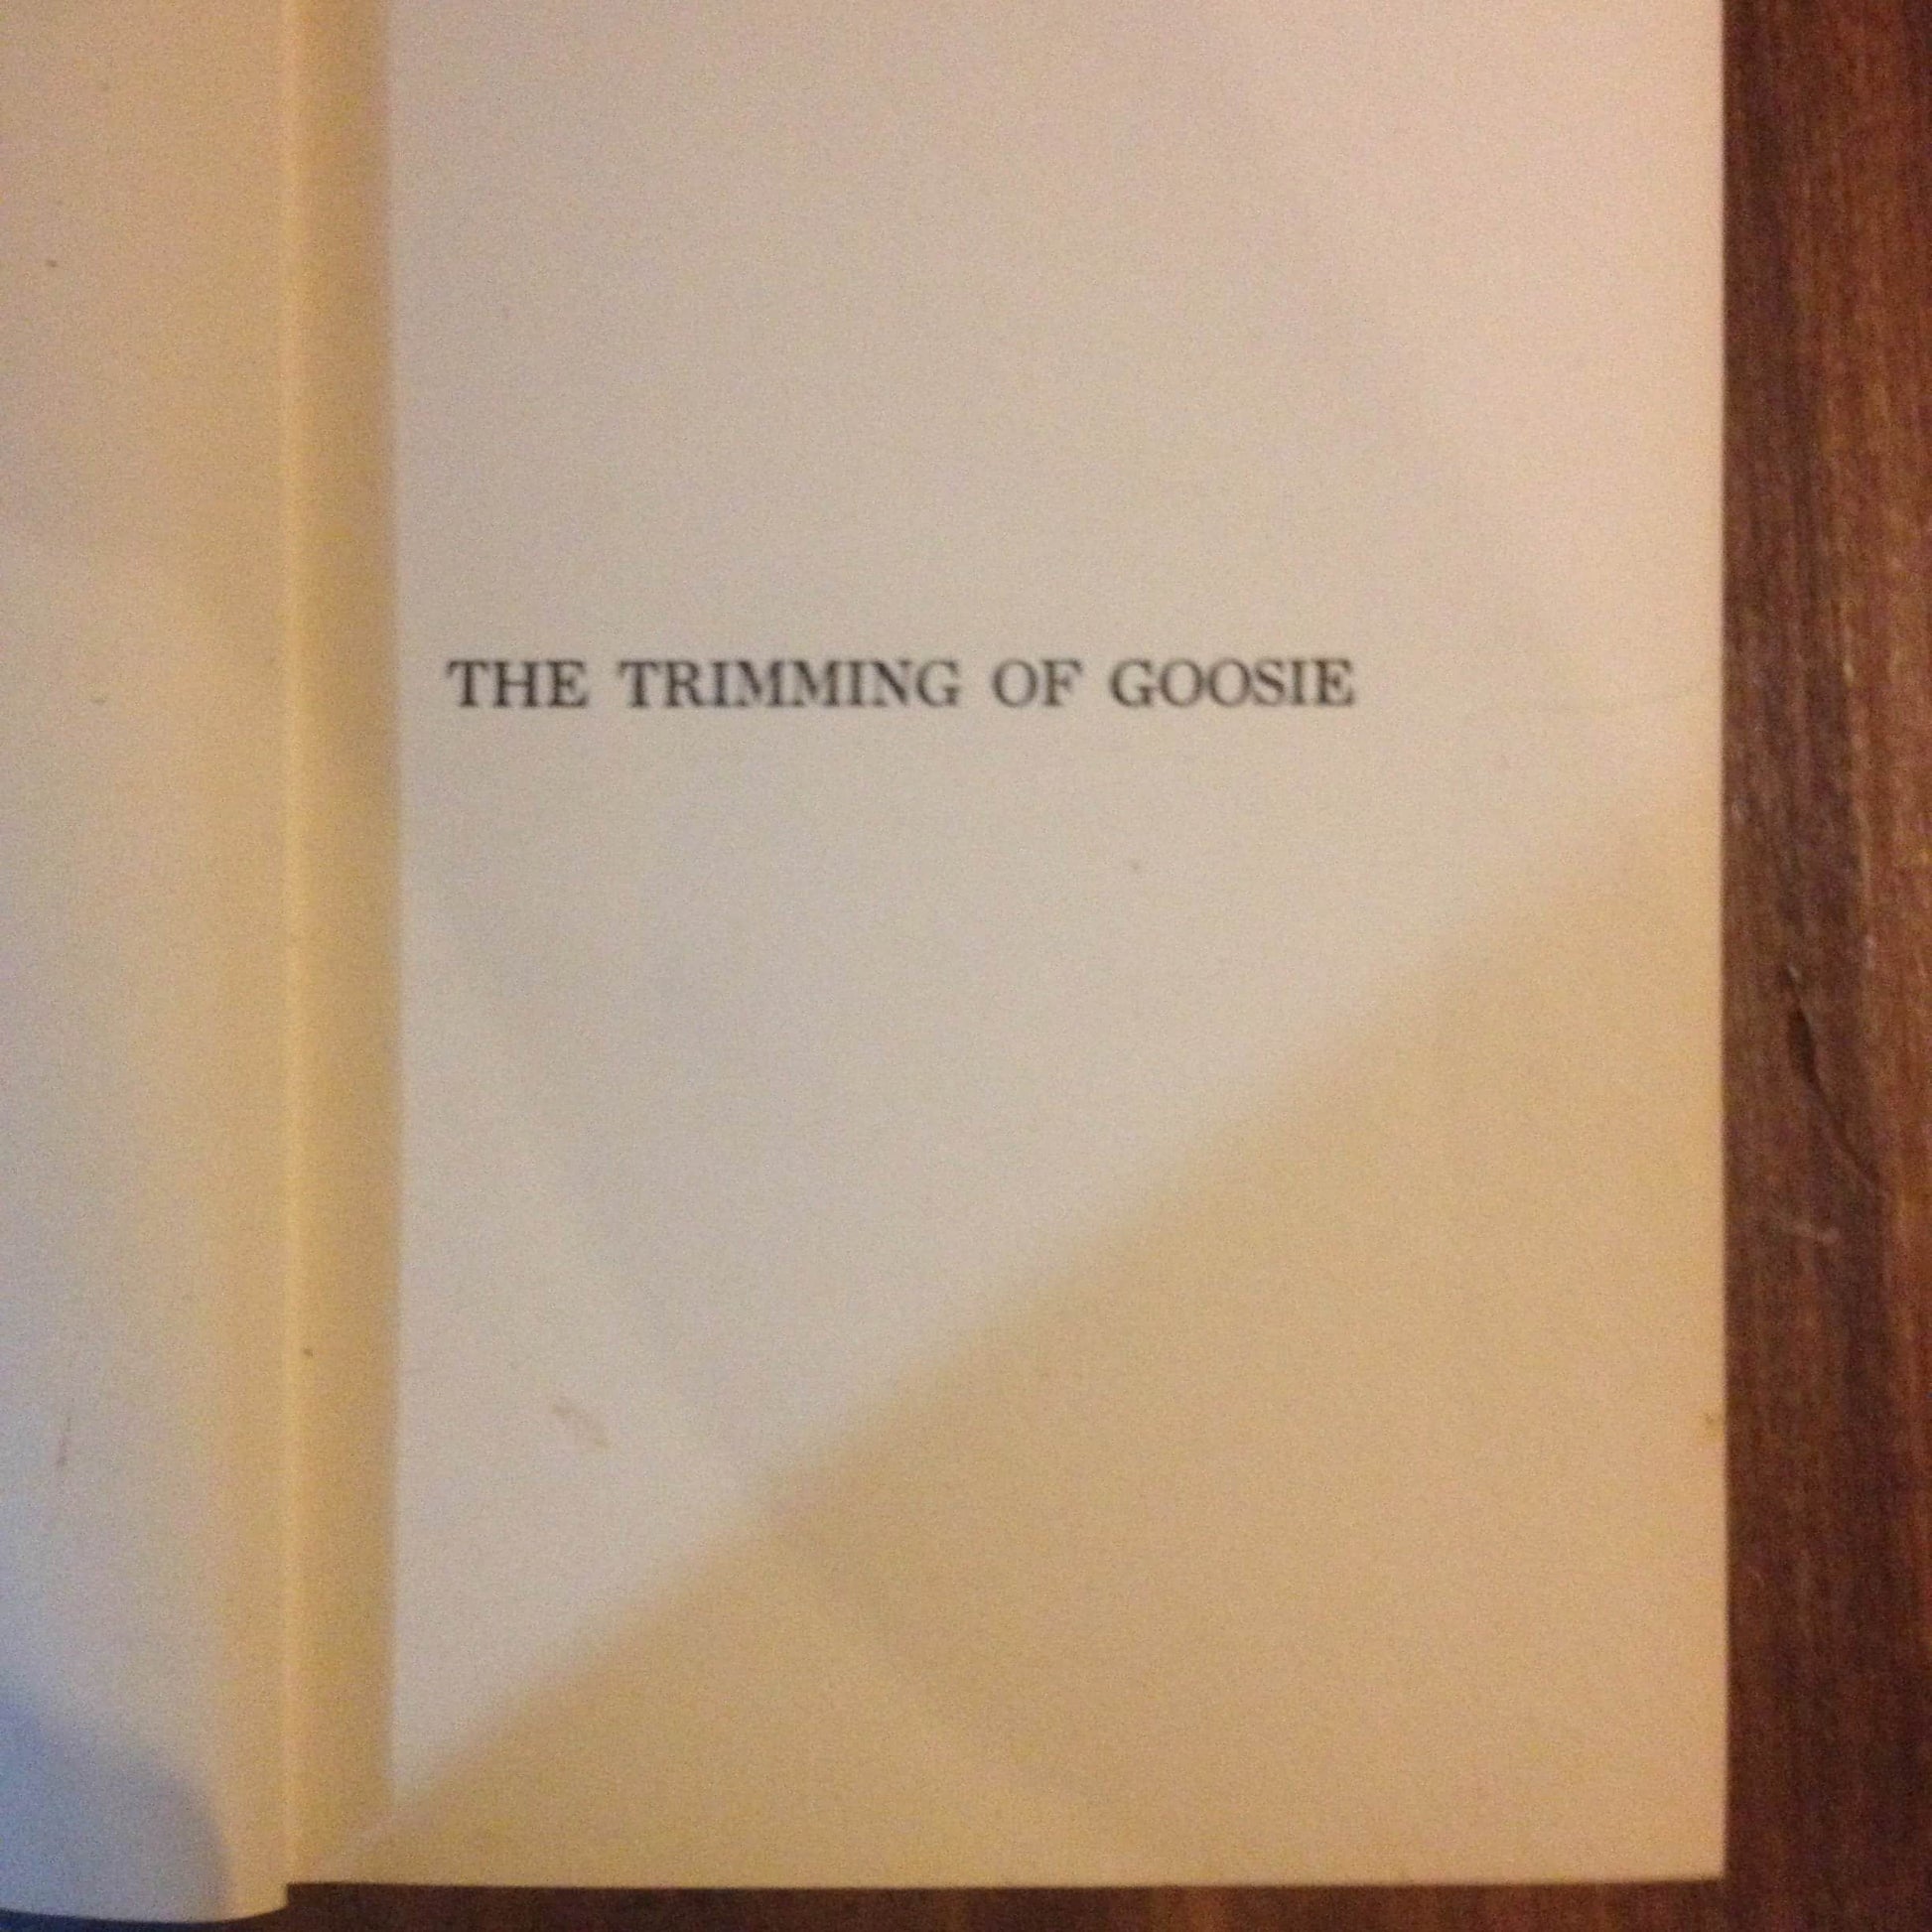 THE TRIMMING OF GOOSIE BY: JAMES HOPPER BooksCardsNBikes